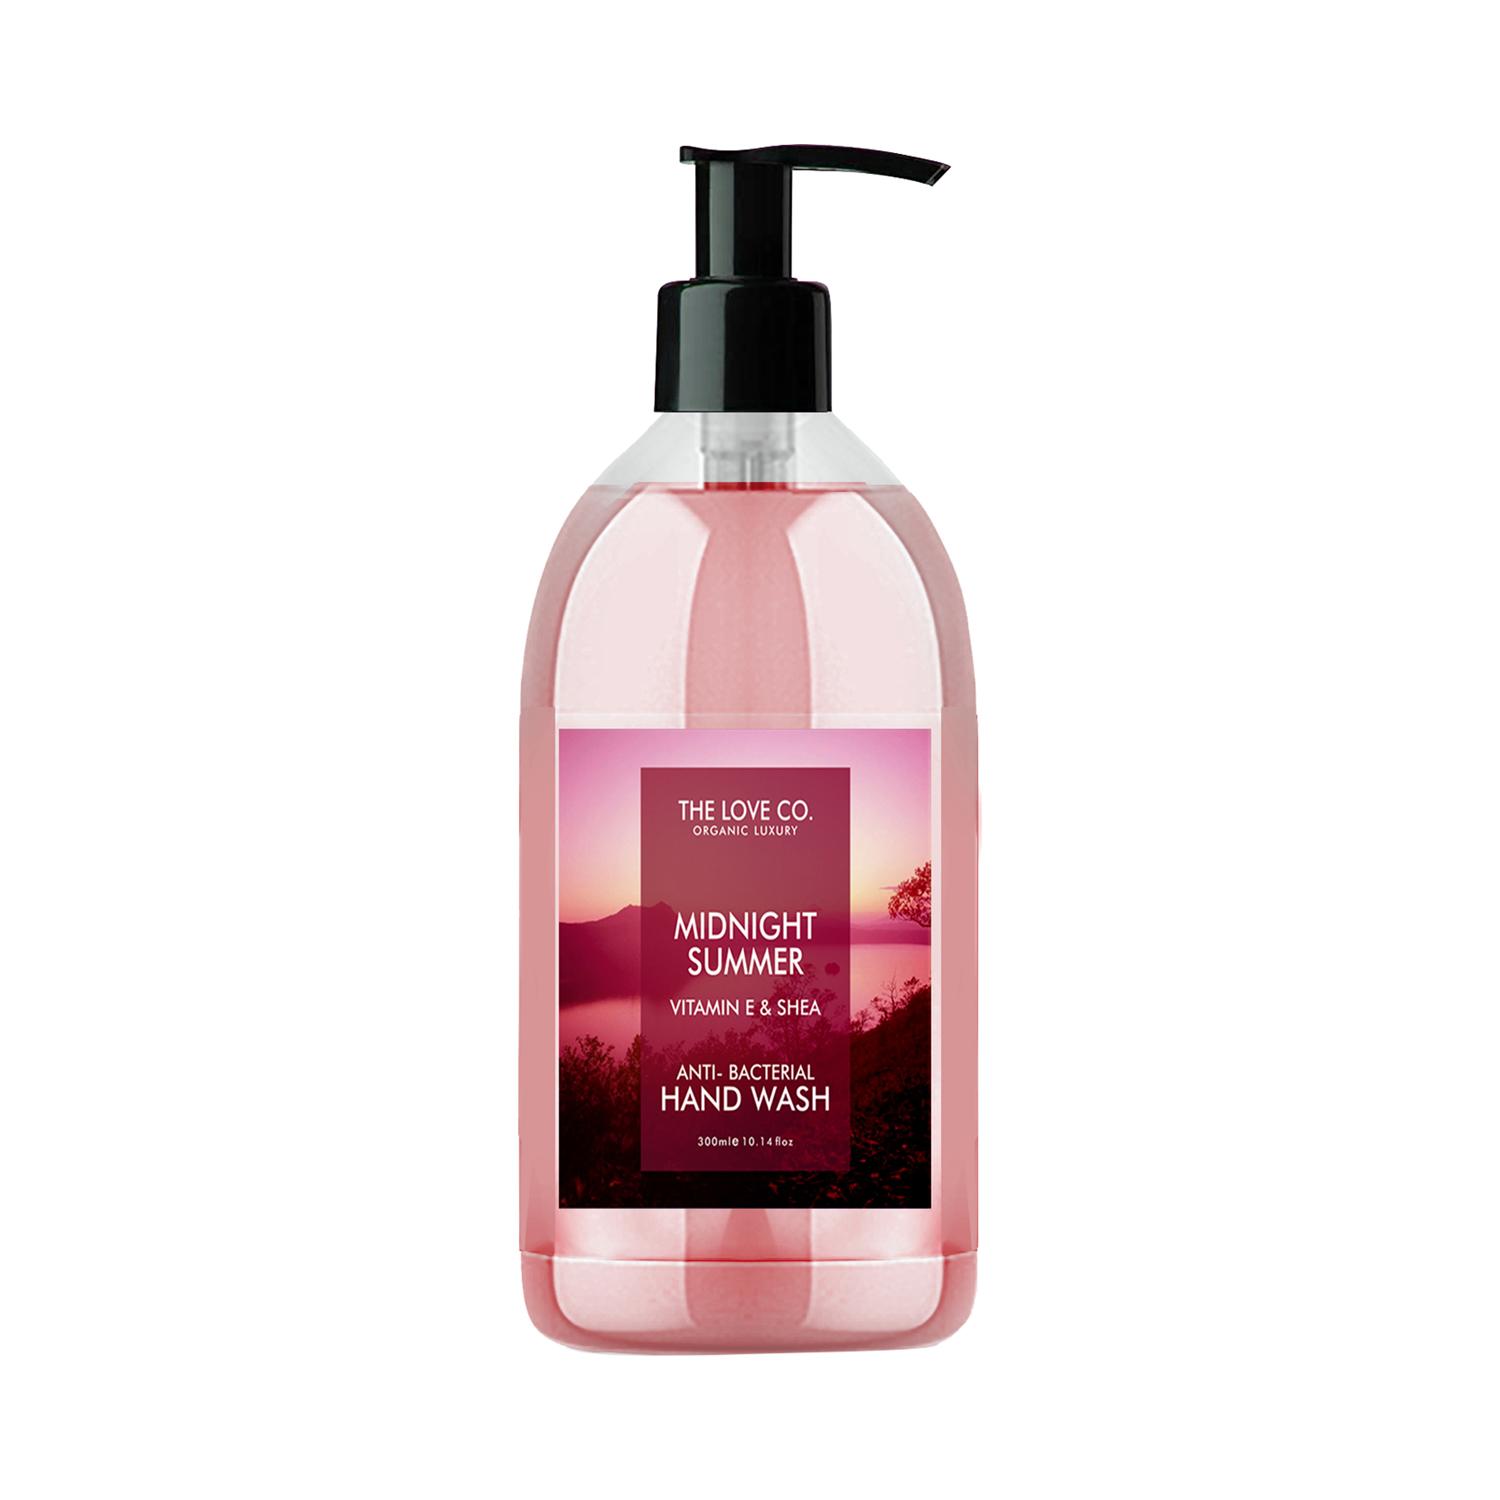 THE LOVE CO. | THE LOVE CO. Midnight Summer Hand Wash For Moisturized Hand (300ml)